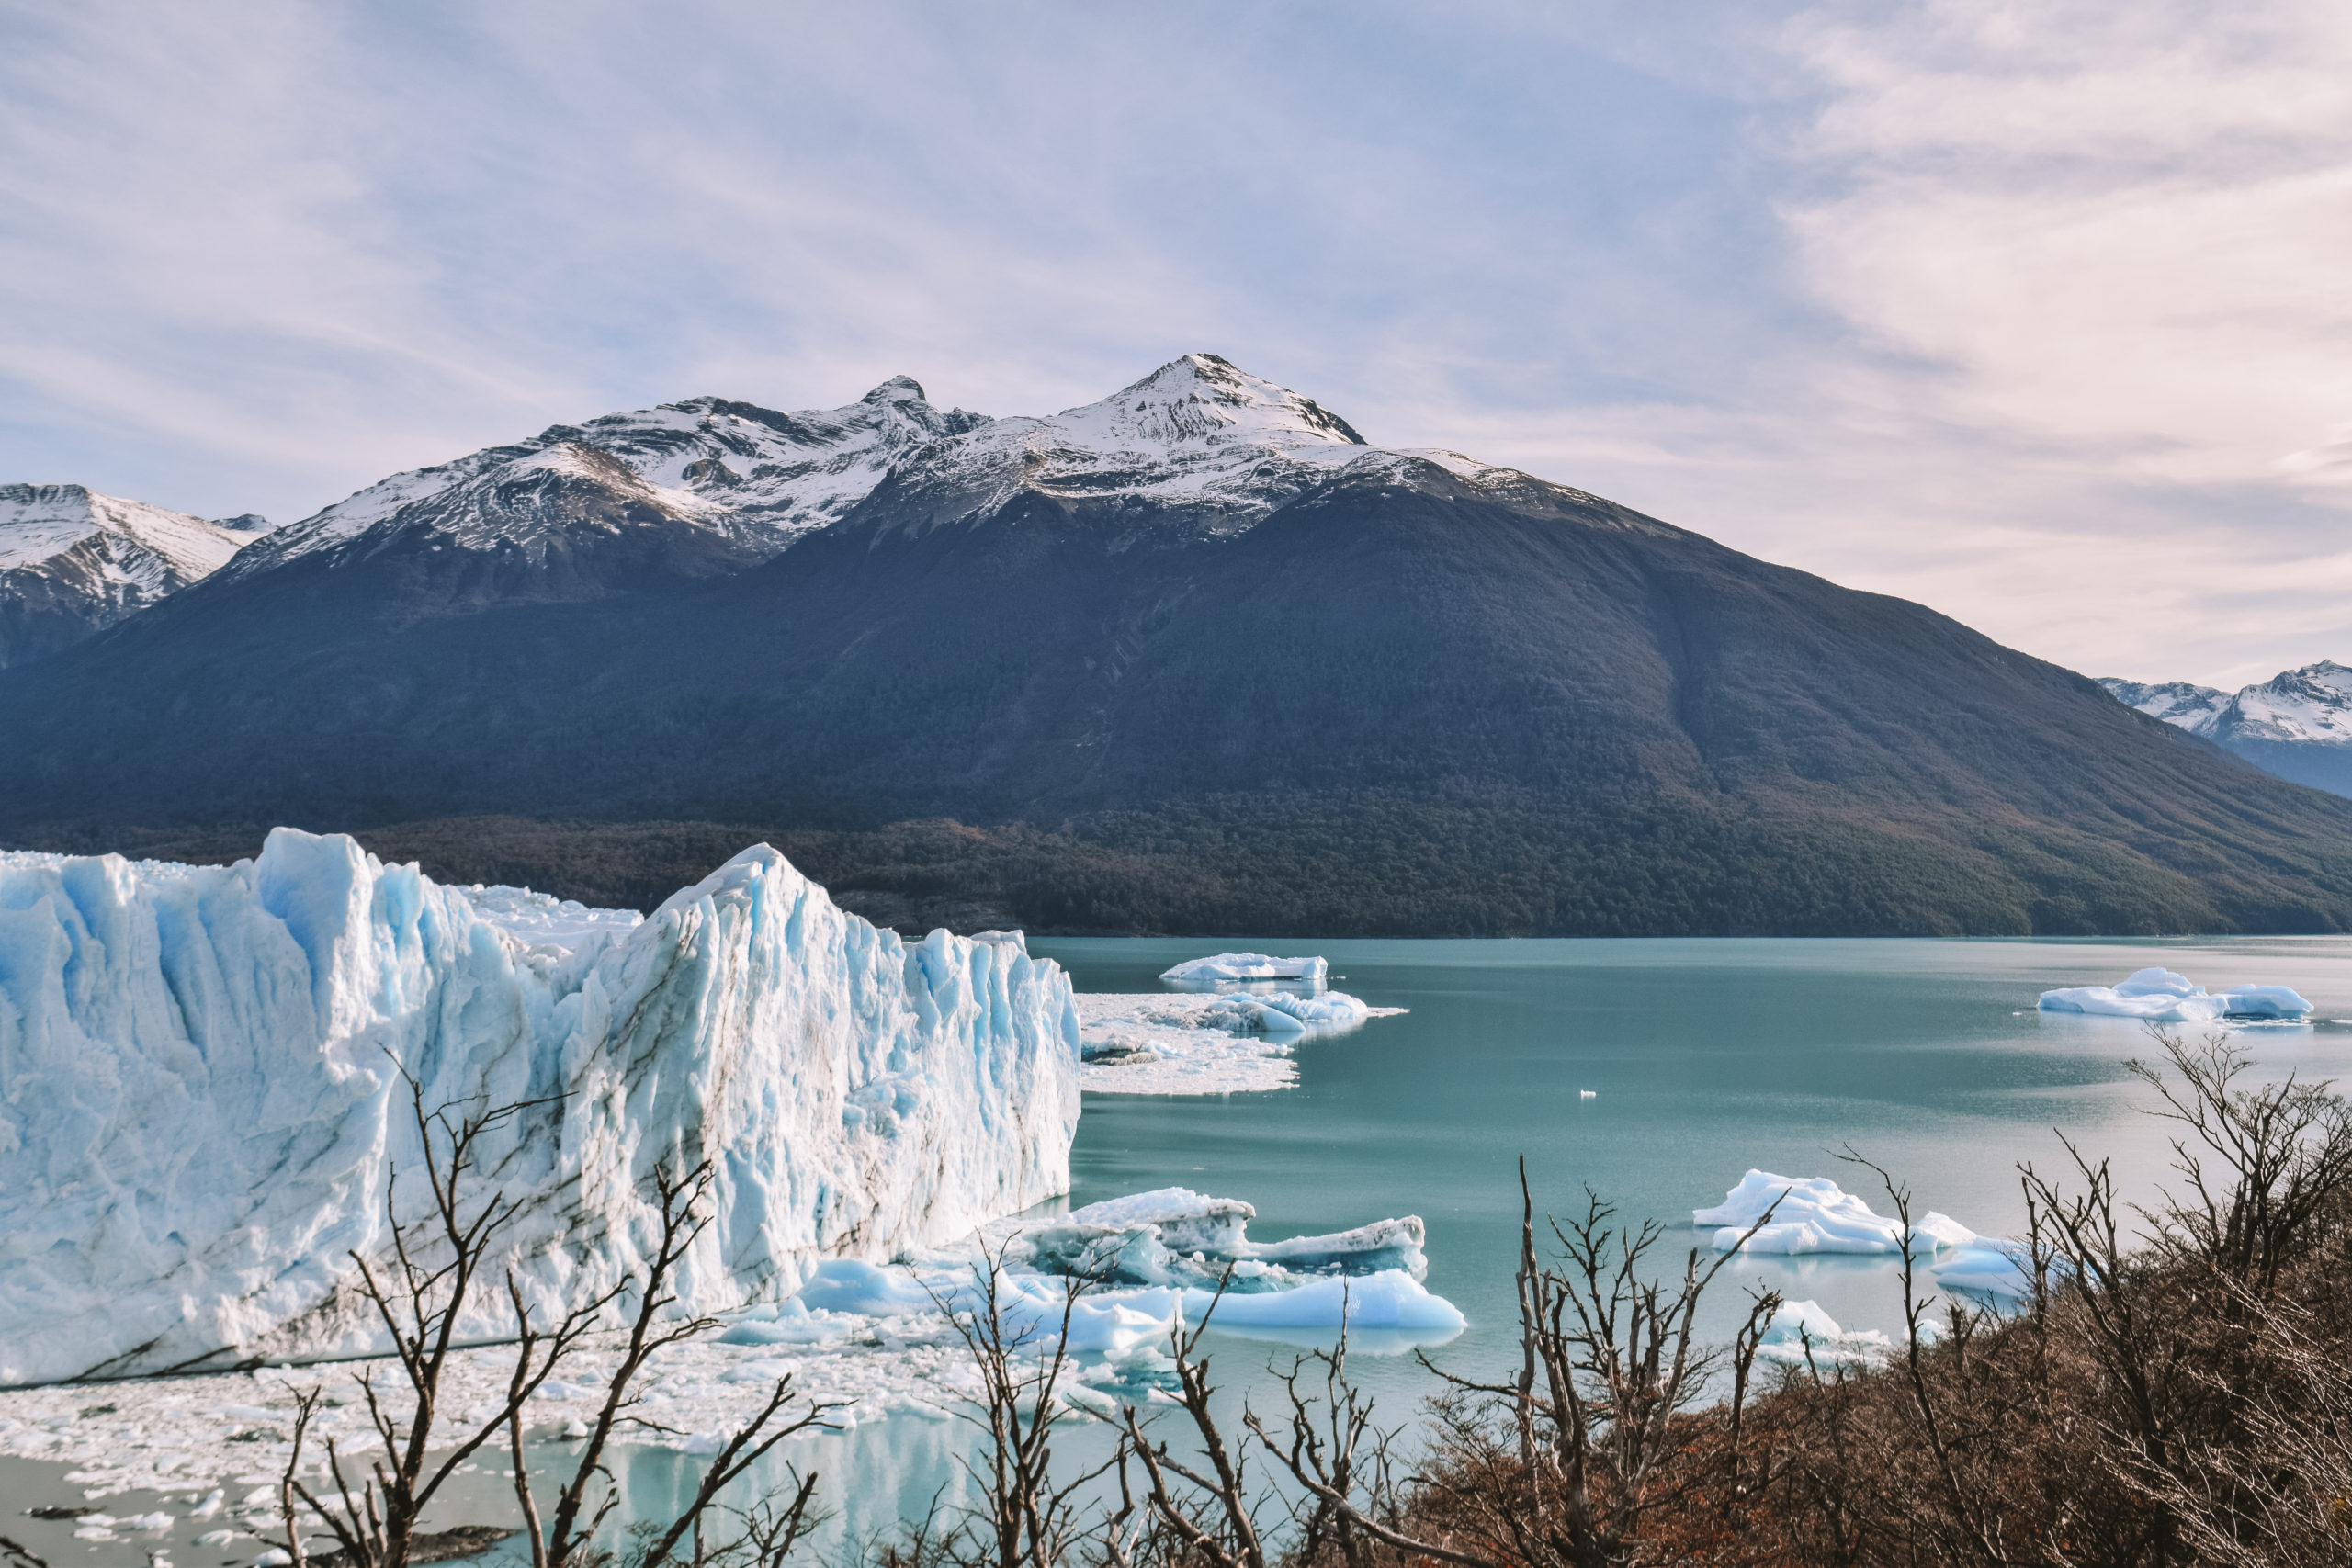 The Best Places to Visit in Patagonia – Argentina and Chile